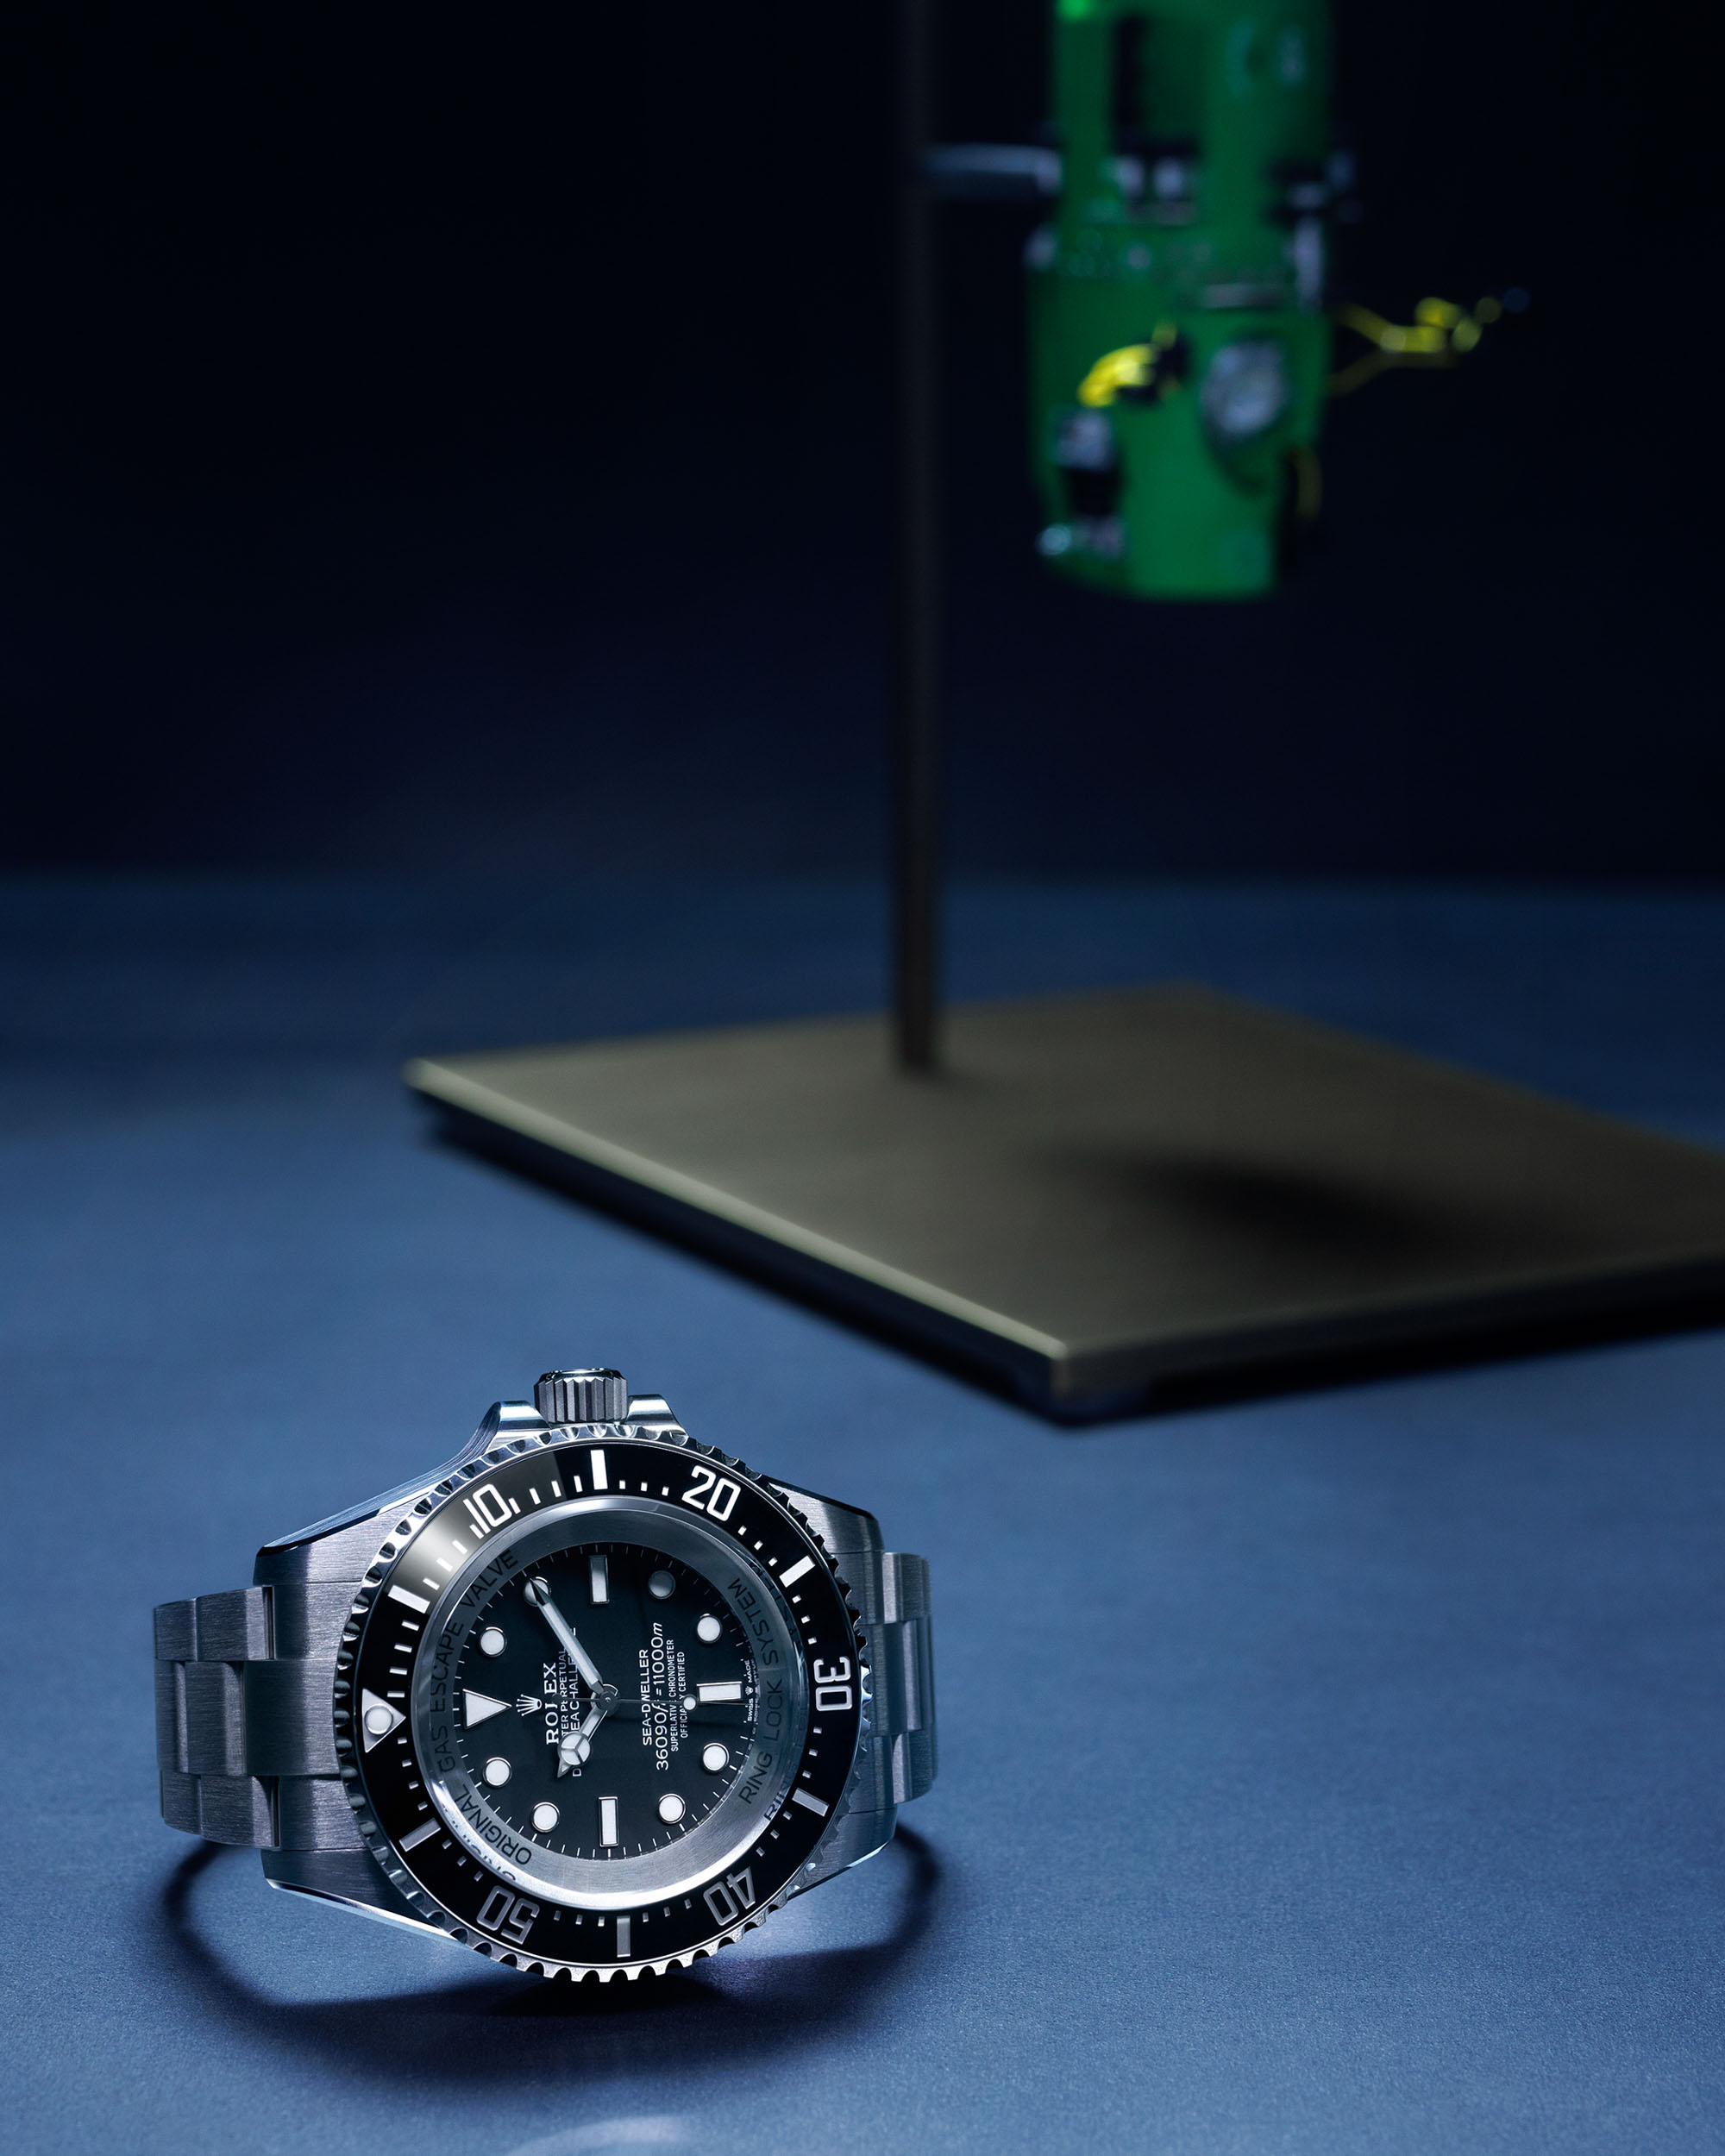 Rolex's Massive New Watch Is Built to Go to the Bottom of the Ocean